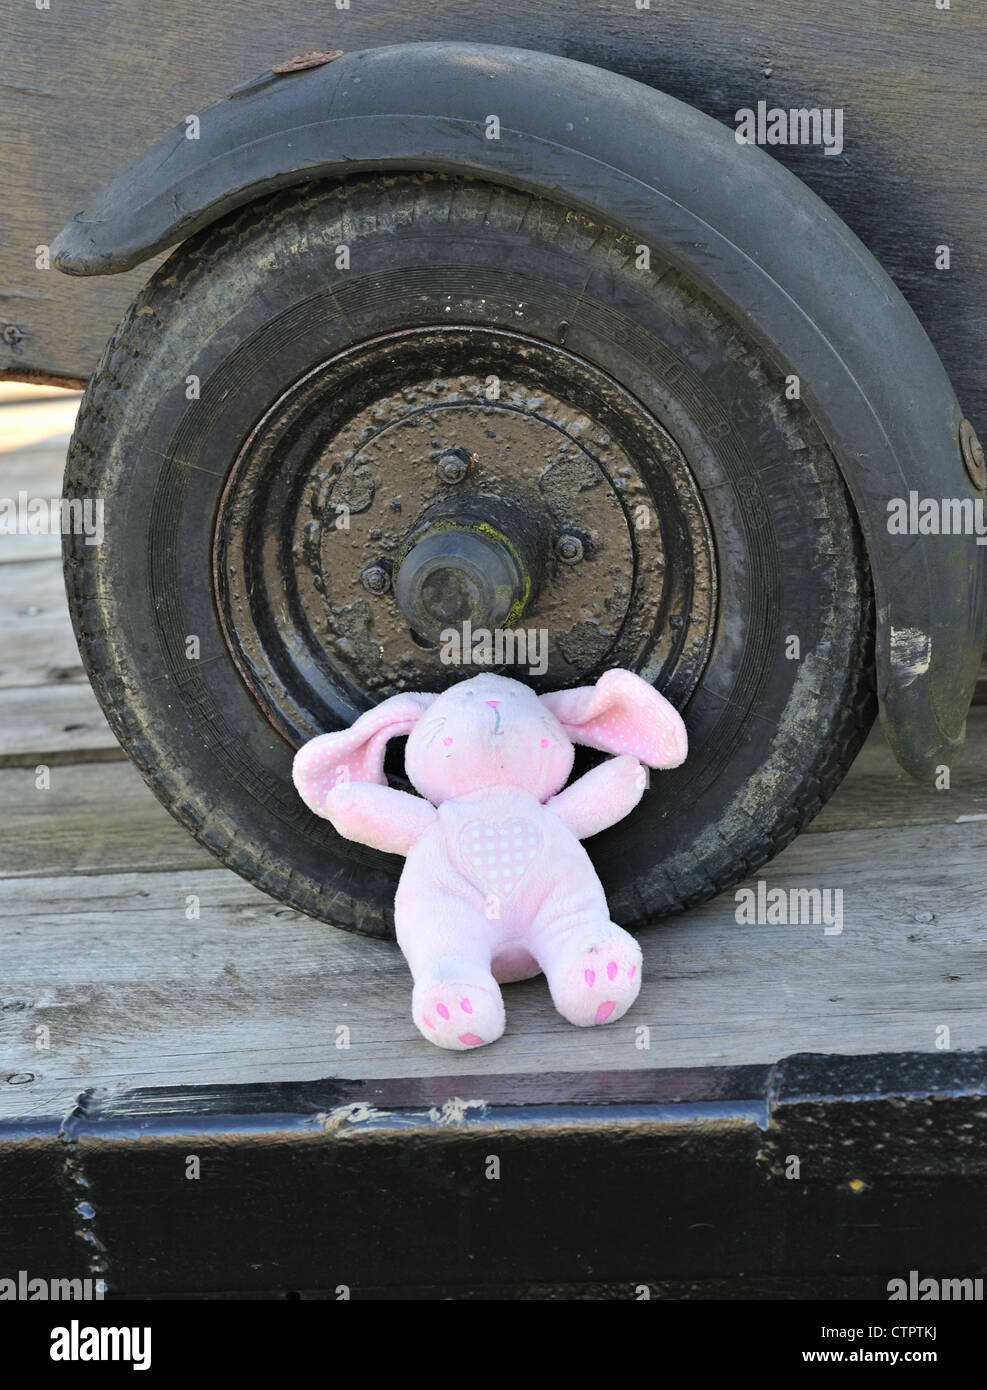 Lost toy resting against a car wheel Stock Photo